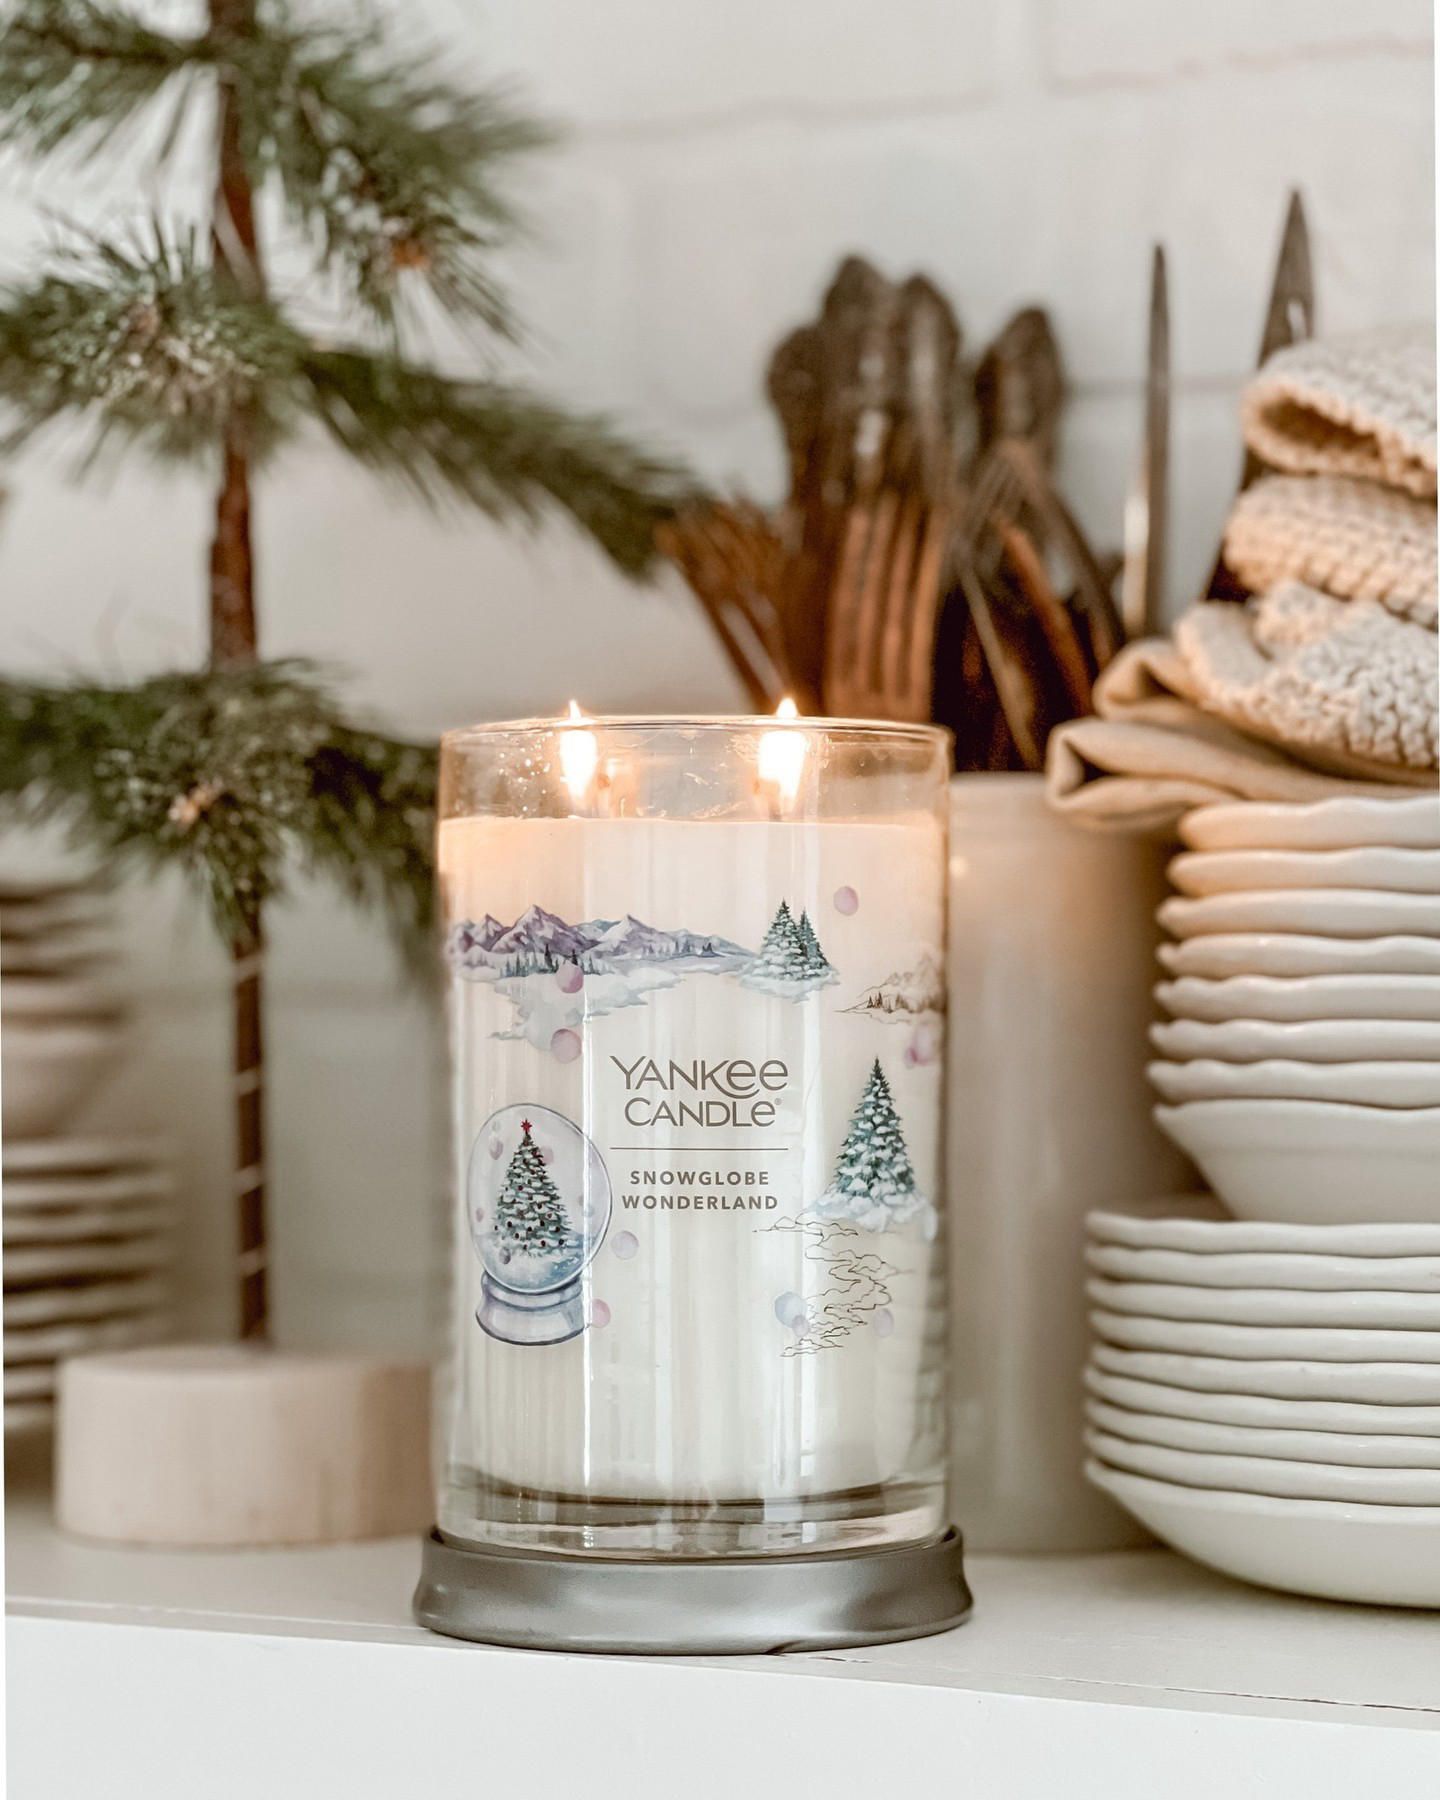 Yankee Candle - We hope you are ringing in the #NewYear surrounded by loved ones and your favorite f